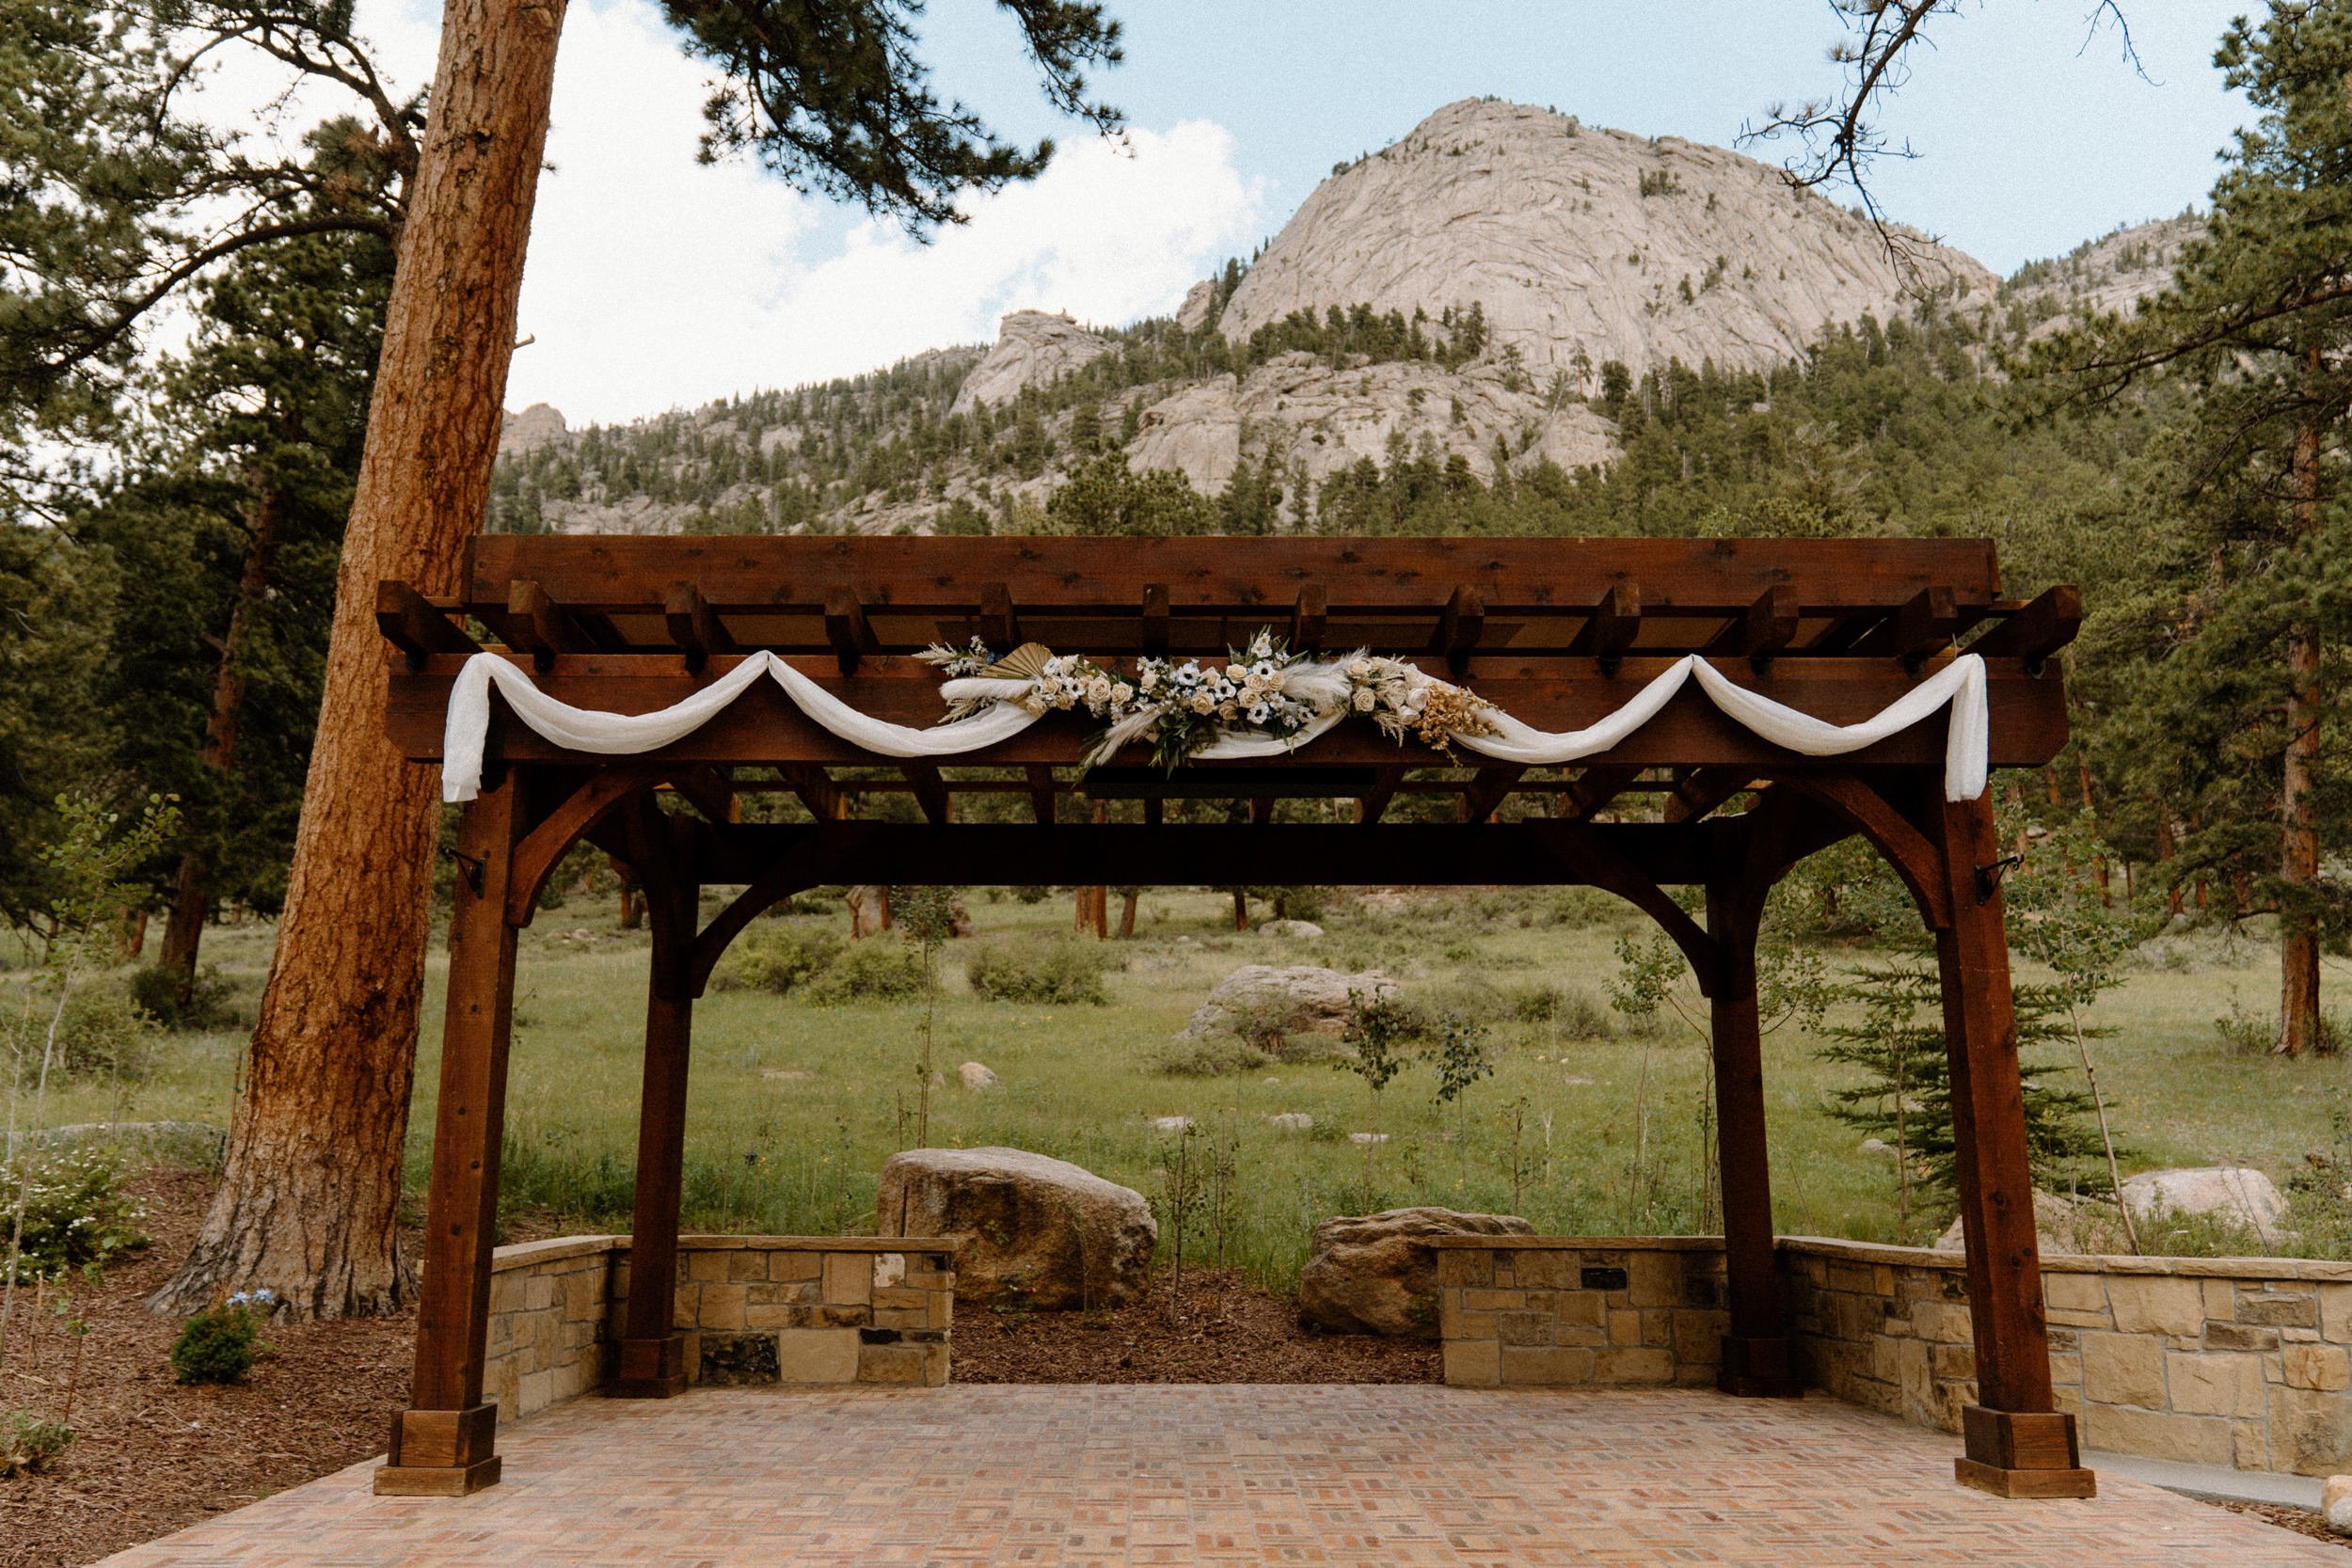 View of the wooden altar decorated in flowers at Della Terra Mountain Chateau in Estes Park, CO